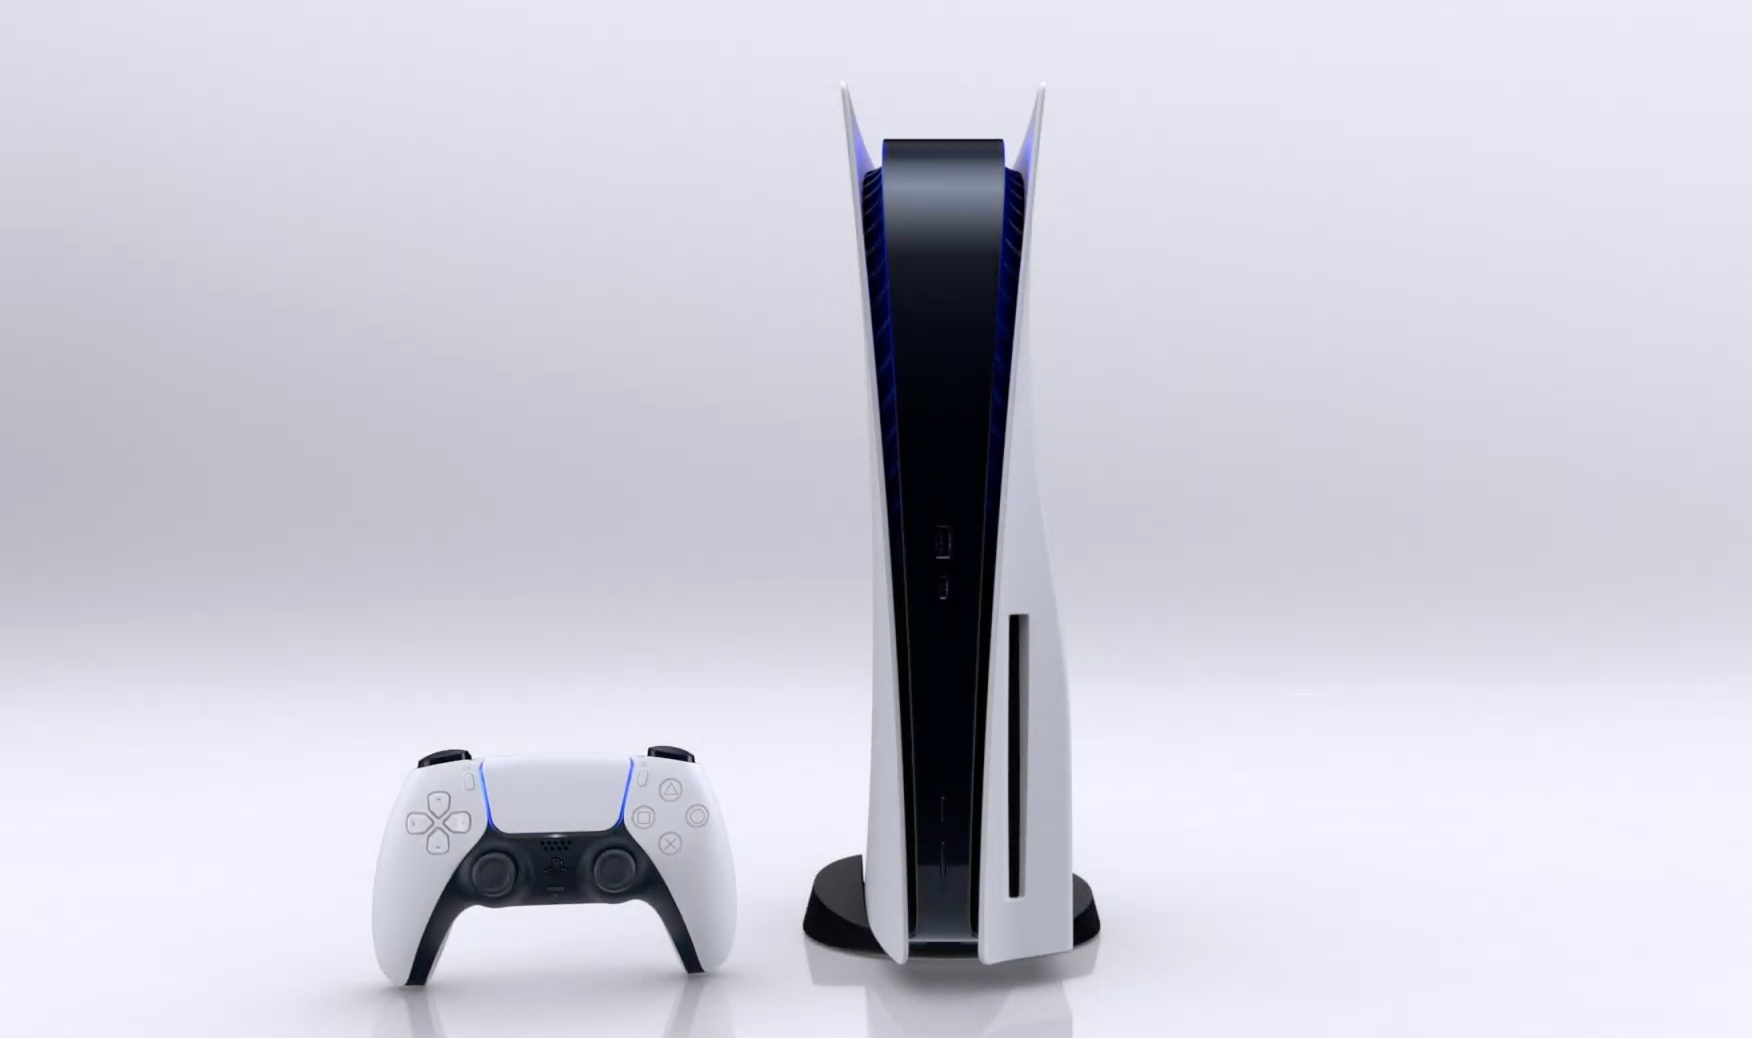 ps5-all-games-consoles-and-details-revealed-1224462.png?auto\u003dwebp\u0026width\u003d1752\u0026height\u003d1038\u0026crop\u003d1.688:1,smart